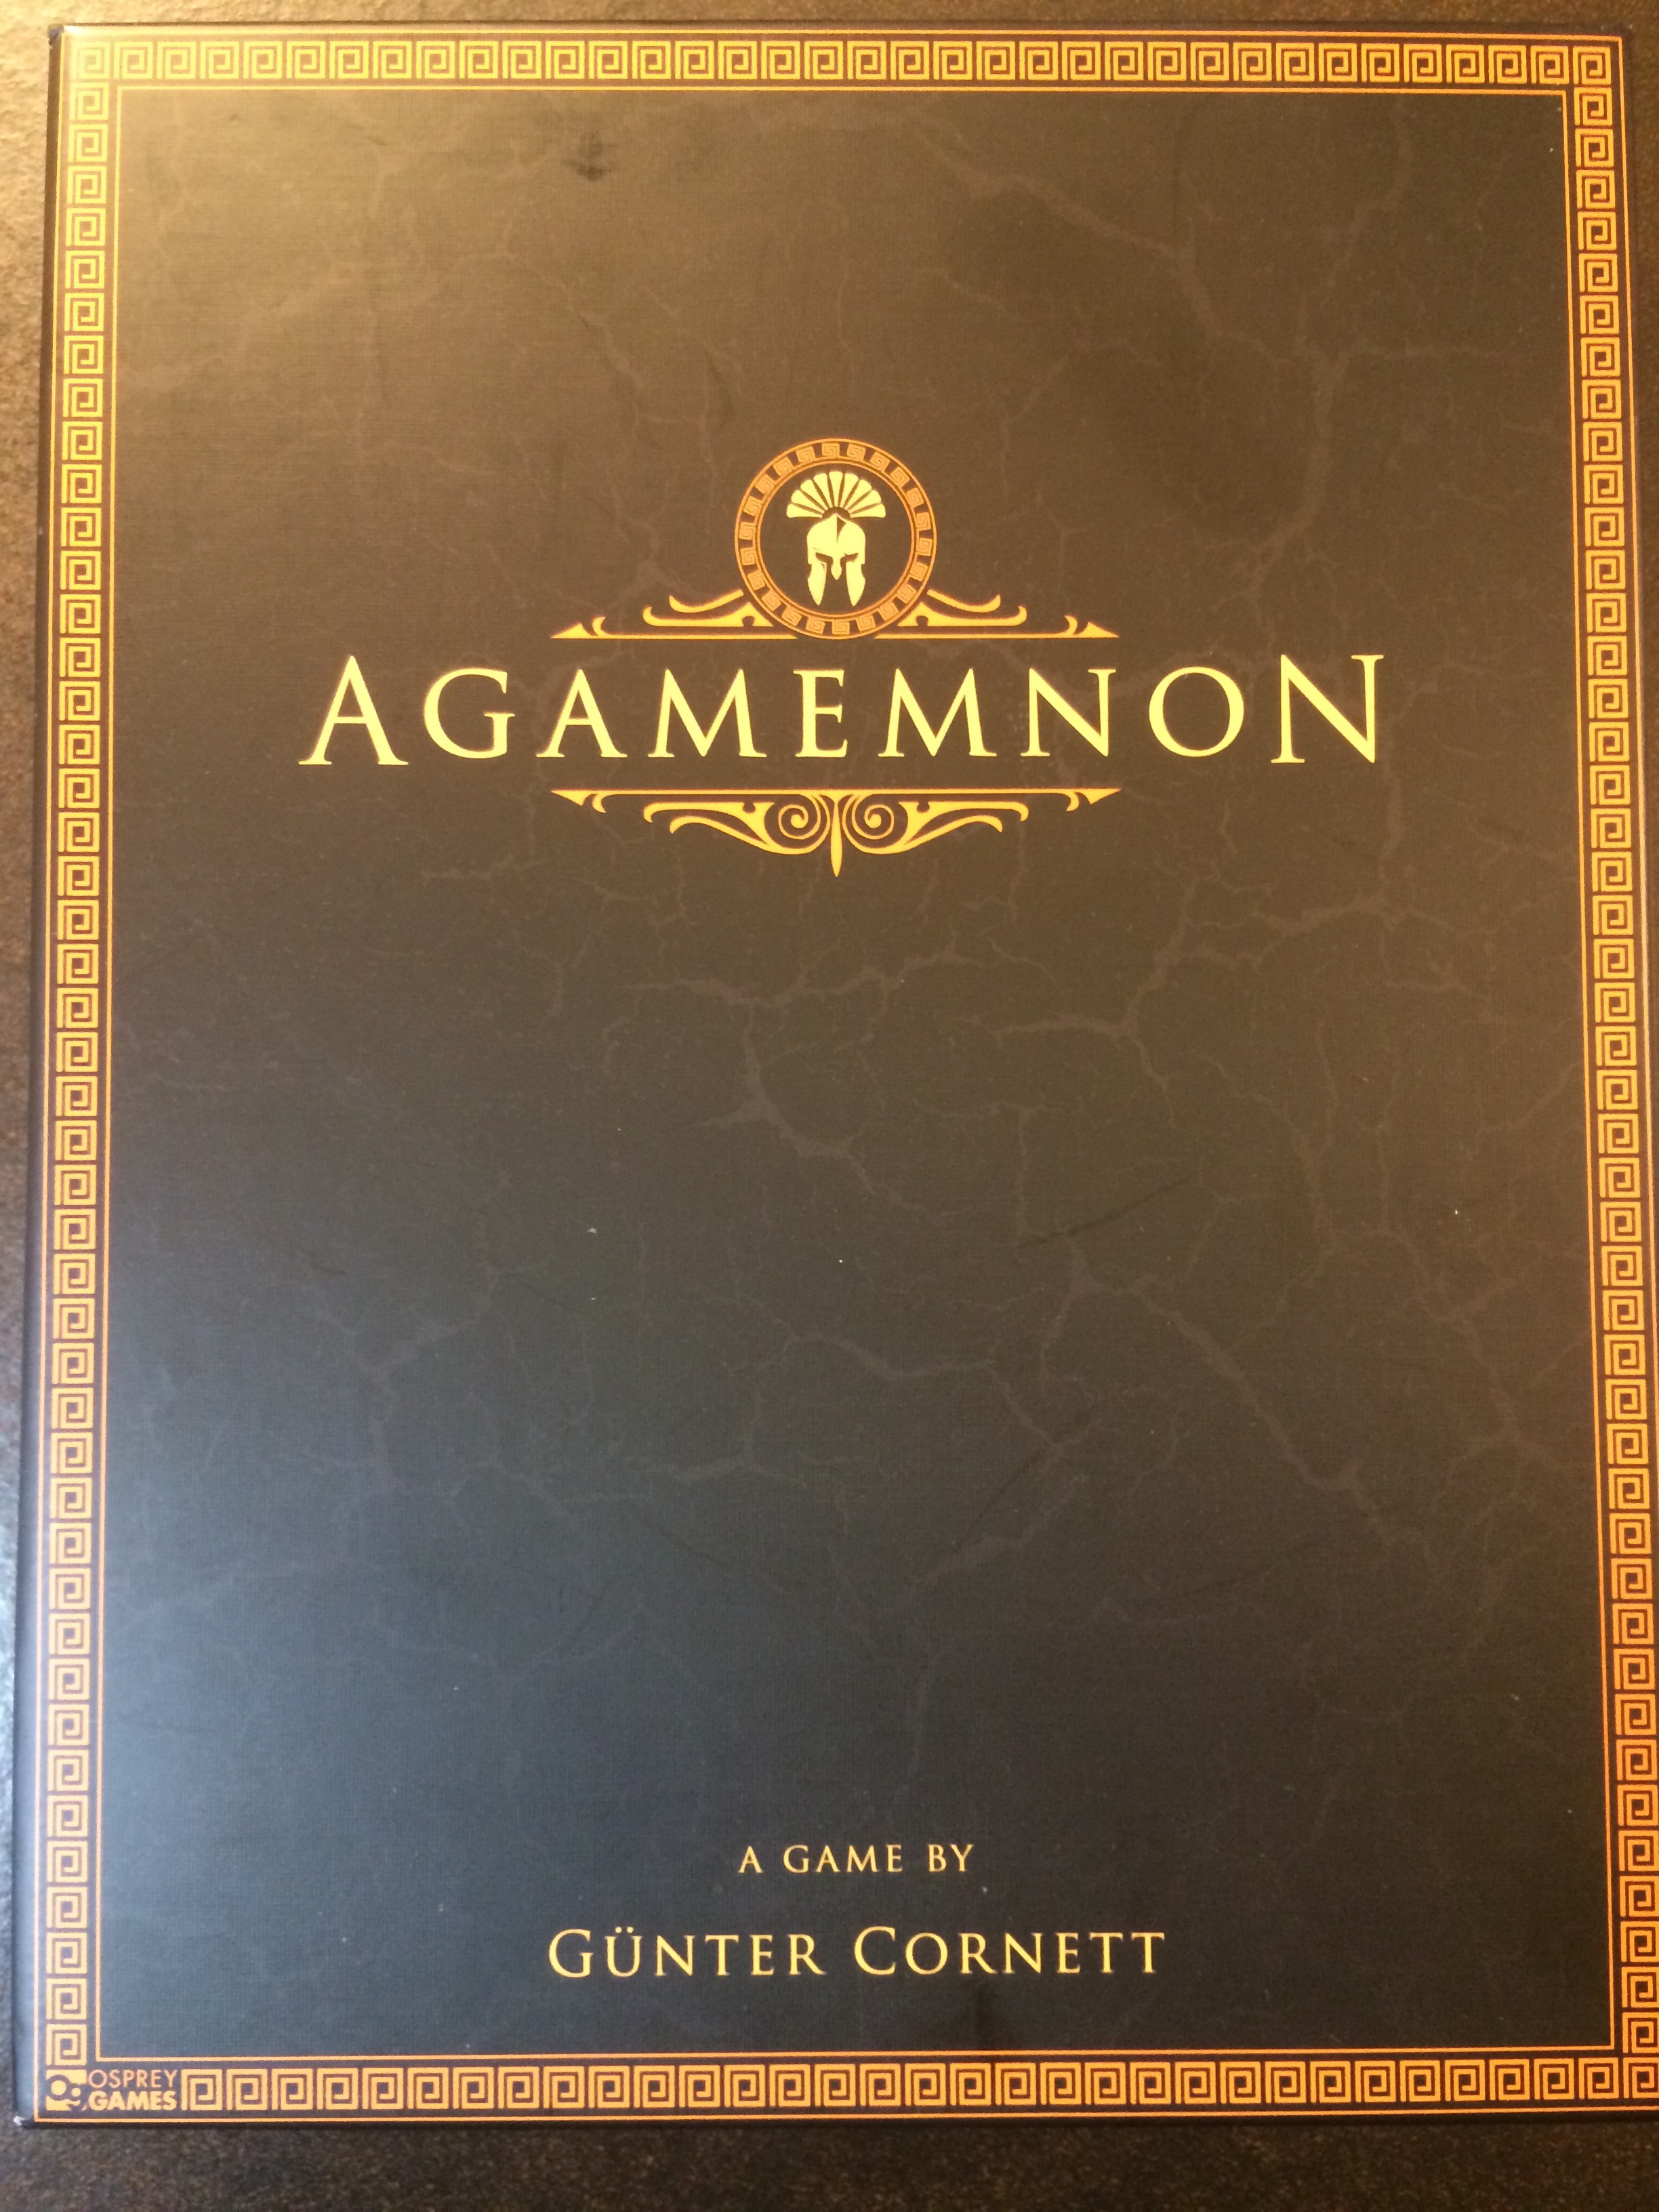 Agamemnon: Two Players Grapple with the Gods and Fate at Troy